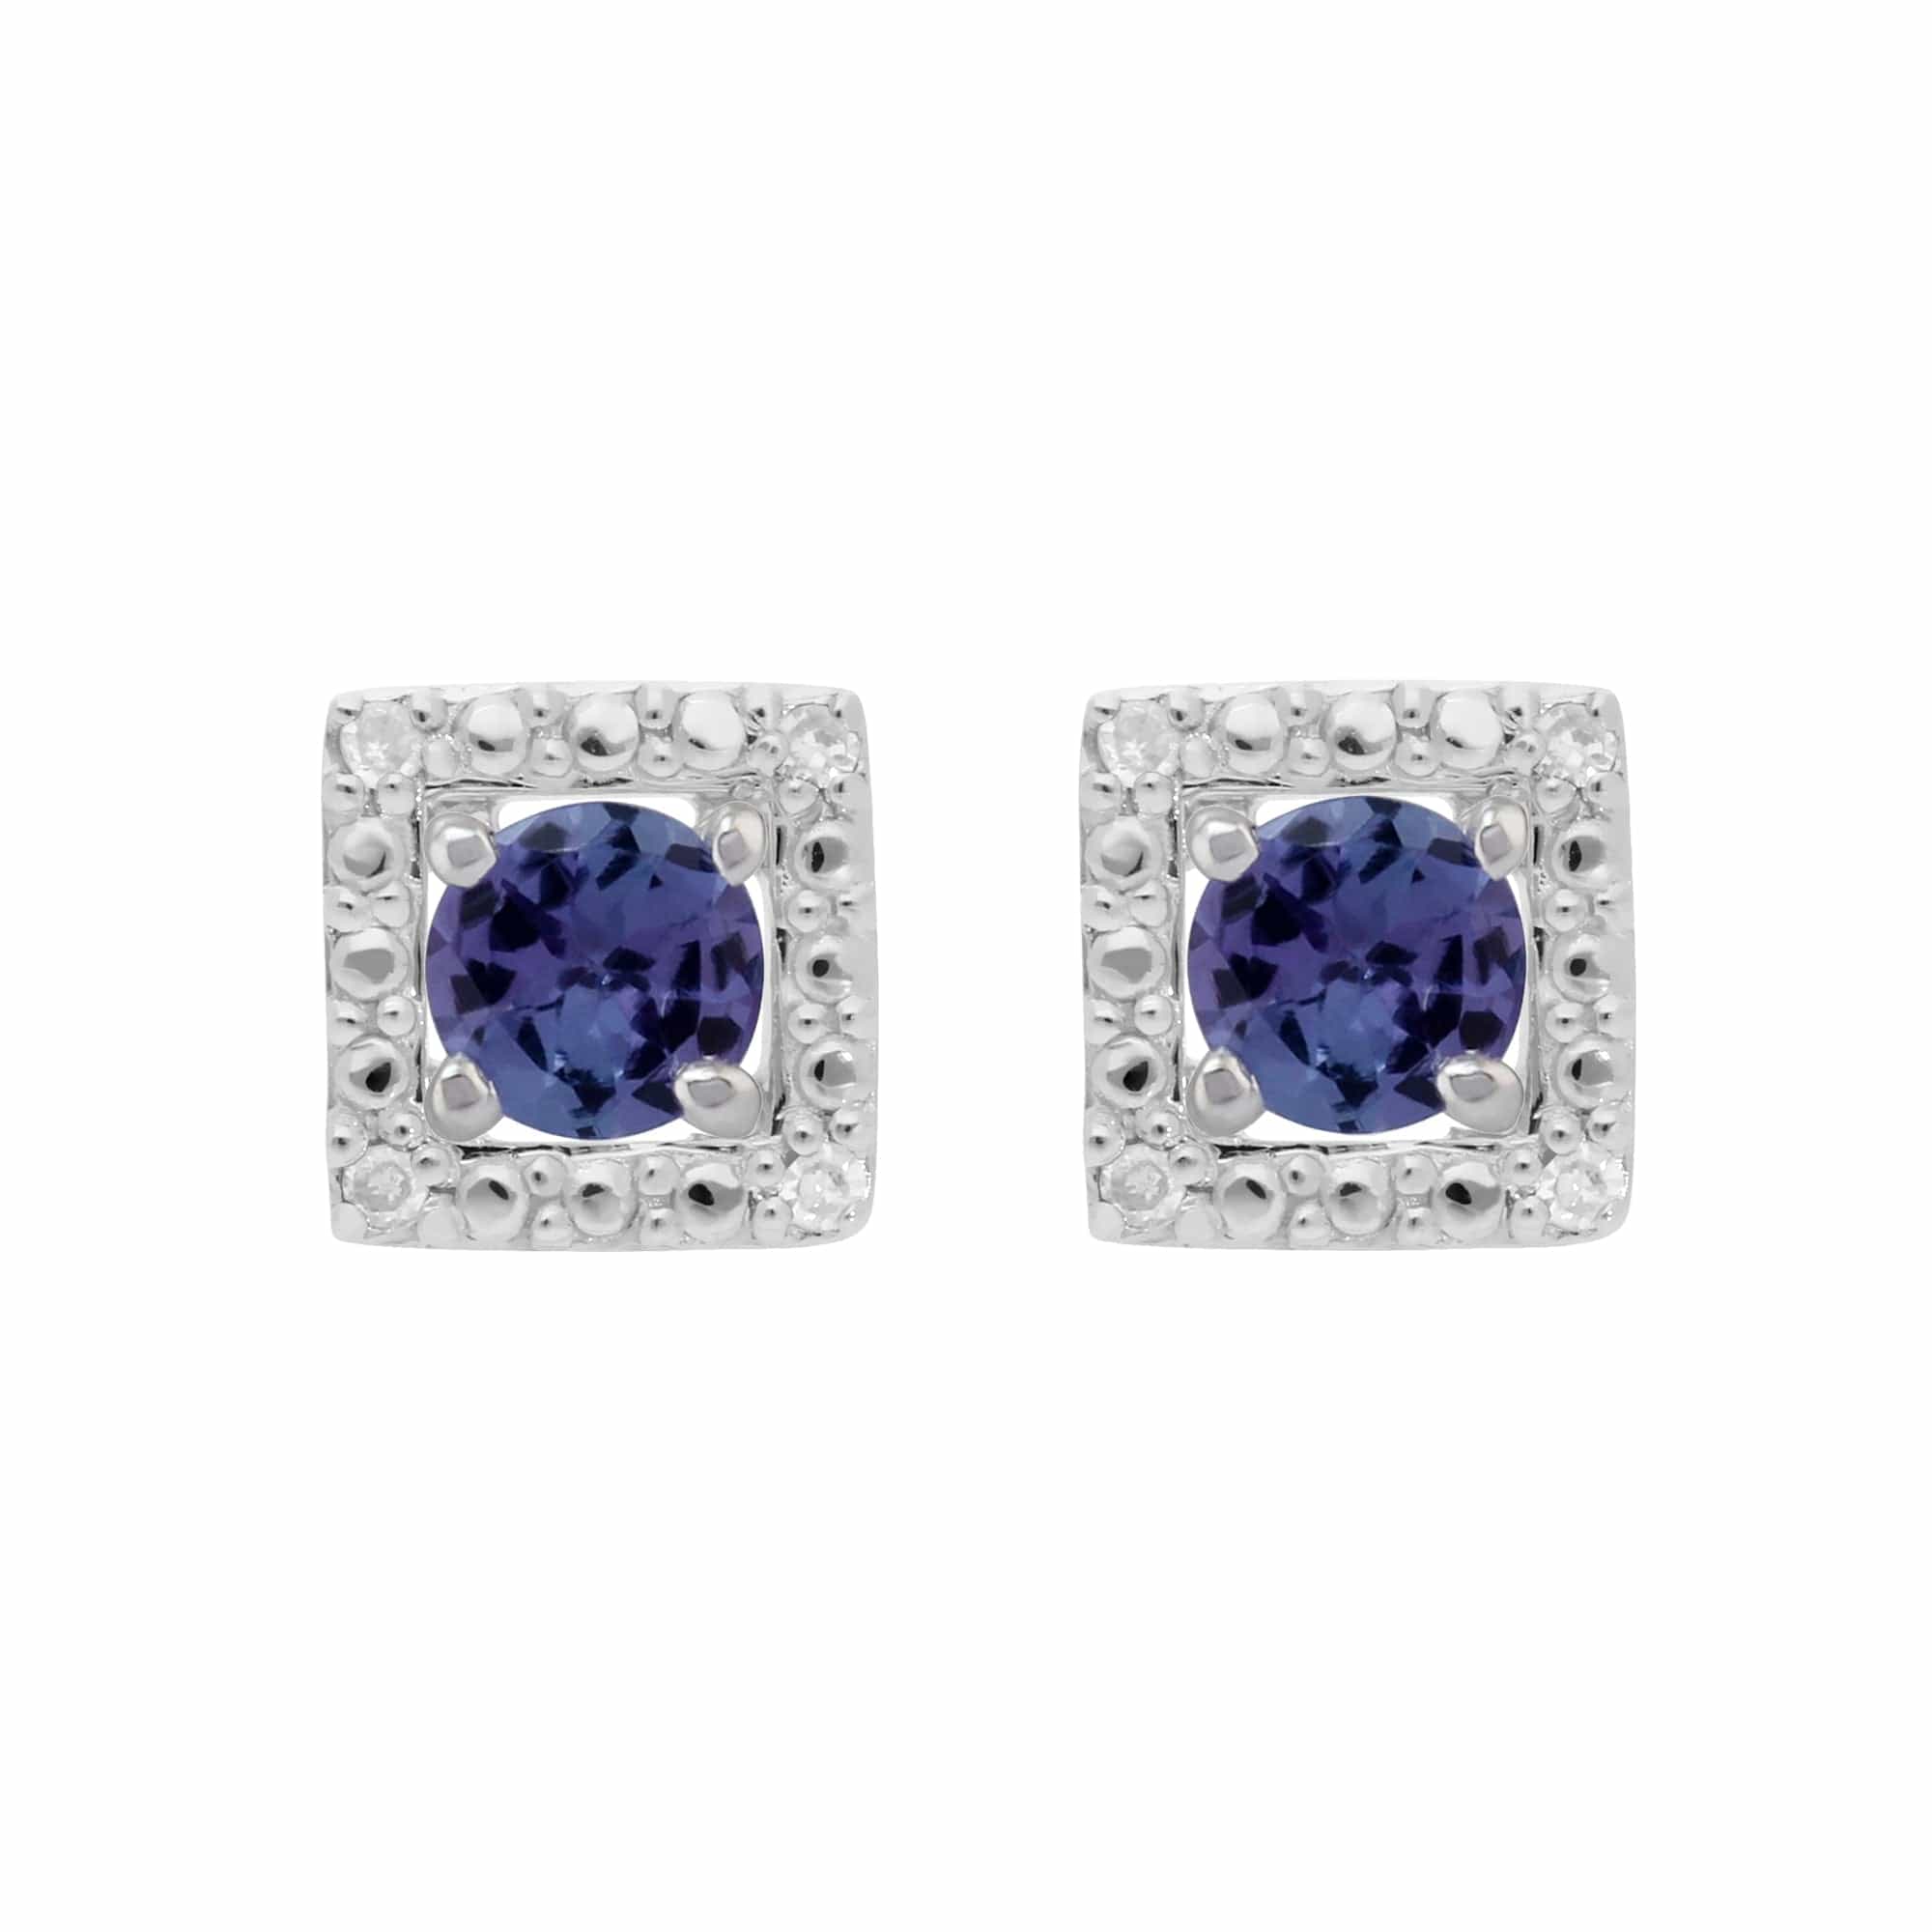 18937-162E0245019 Classic Round Tanzanite Stud Earrings with Detachable Diamond Square Ear Jacket in 9ct White Gold 1